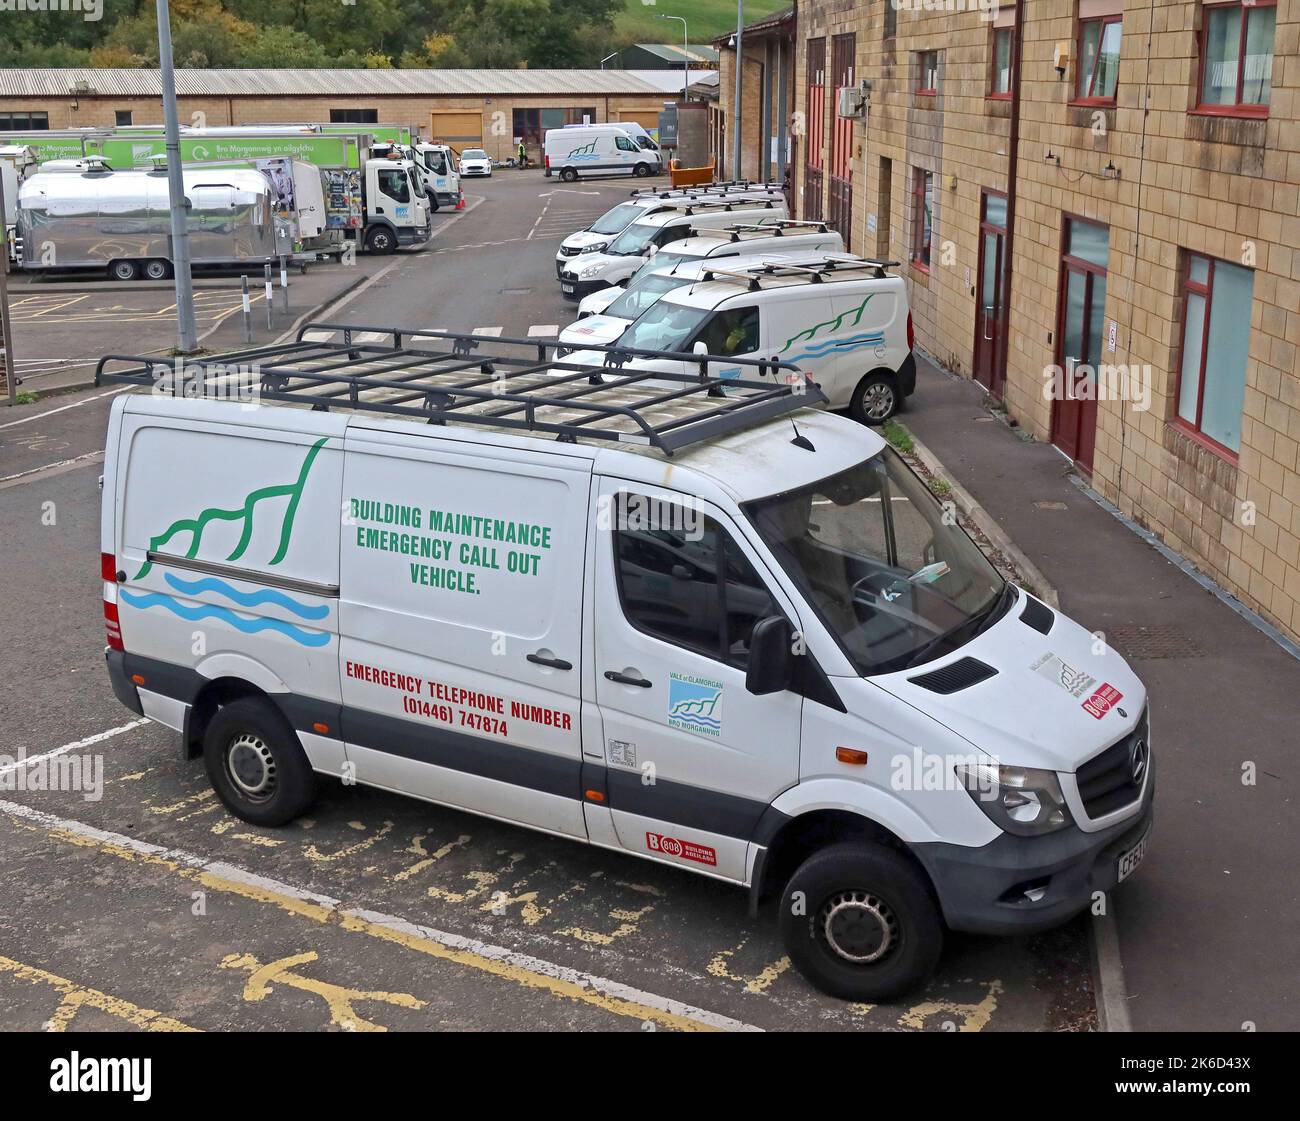 Vale Of Glamorgan Council vehicles, building services for social housing, emergency call out, building maintenance Stock Photo